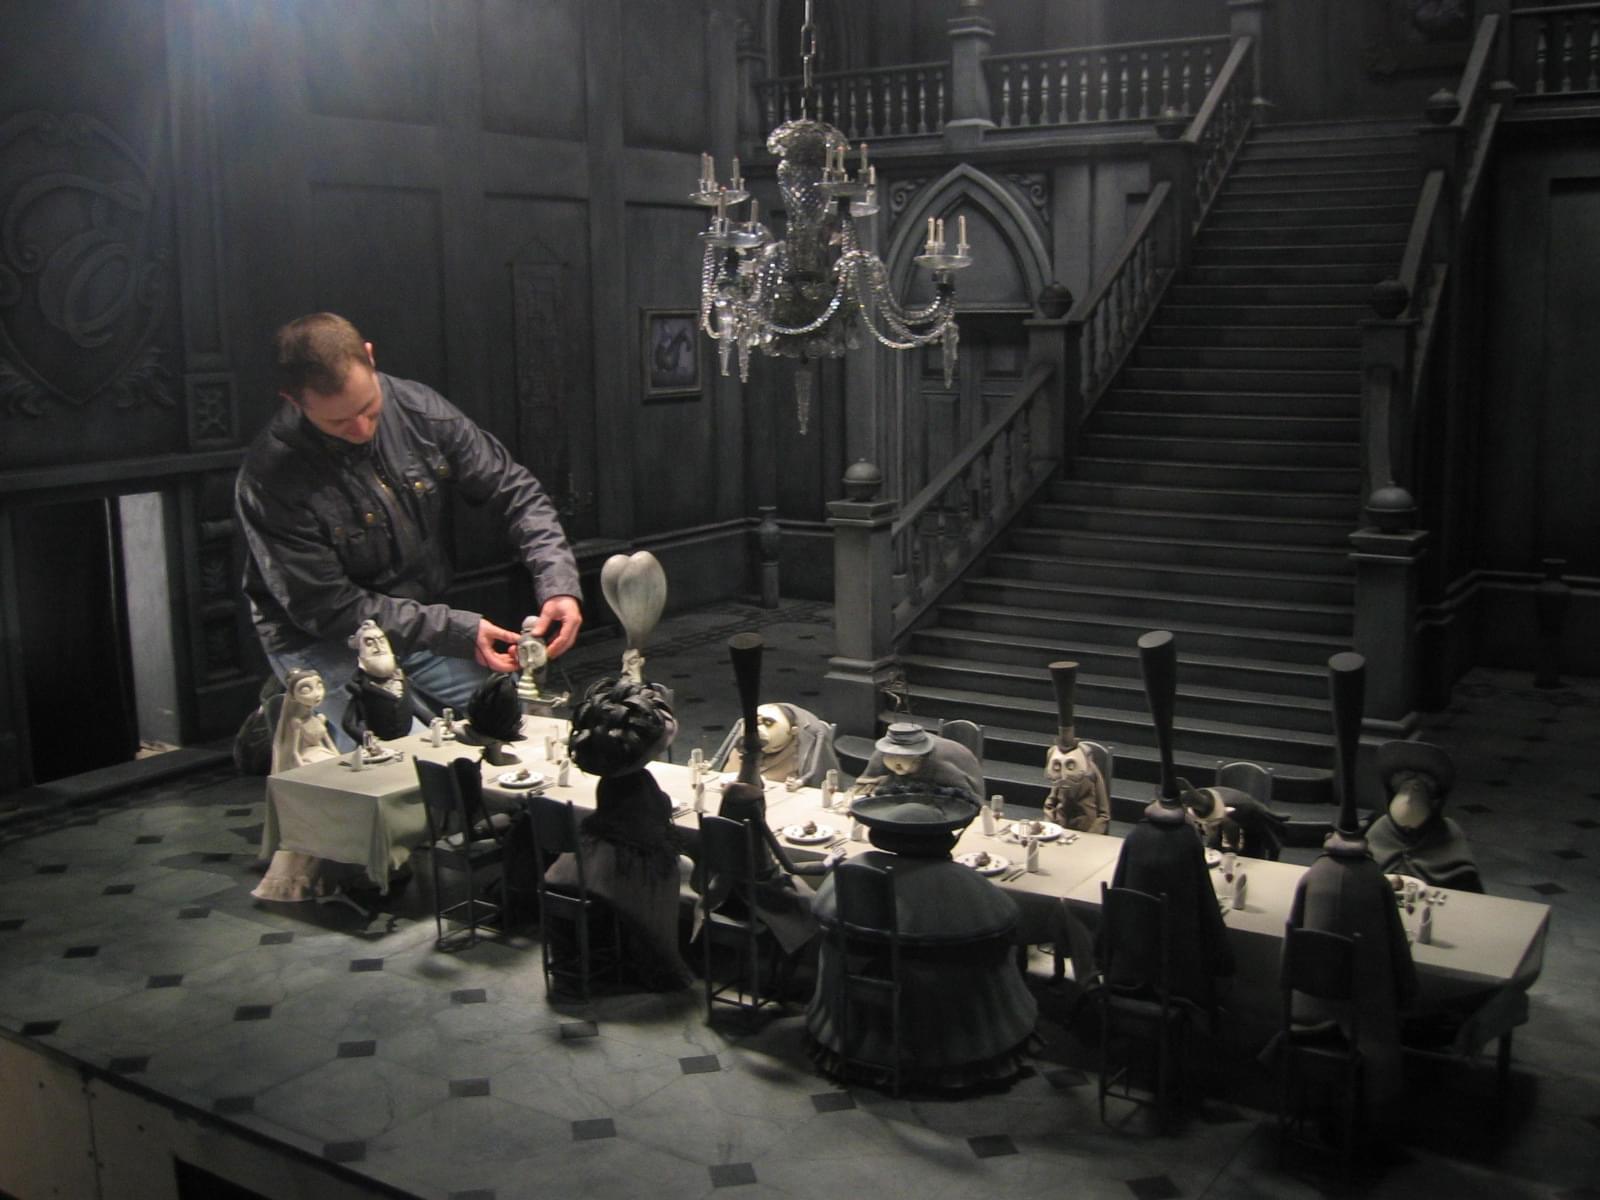 Animator Tim Allen works on the set of the film Corpse Bride